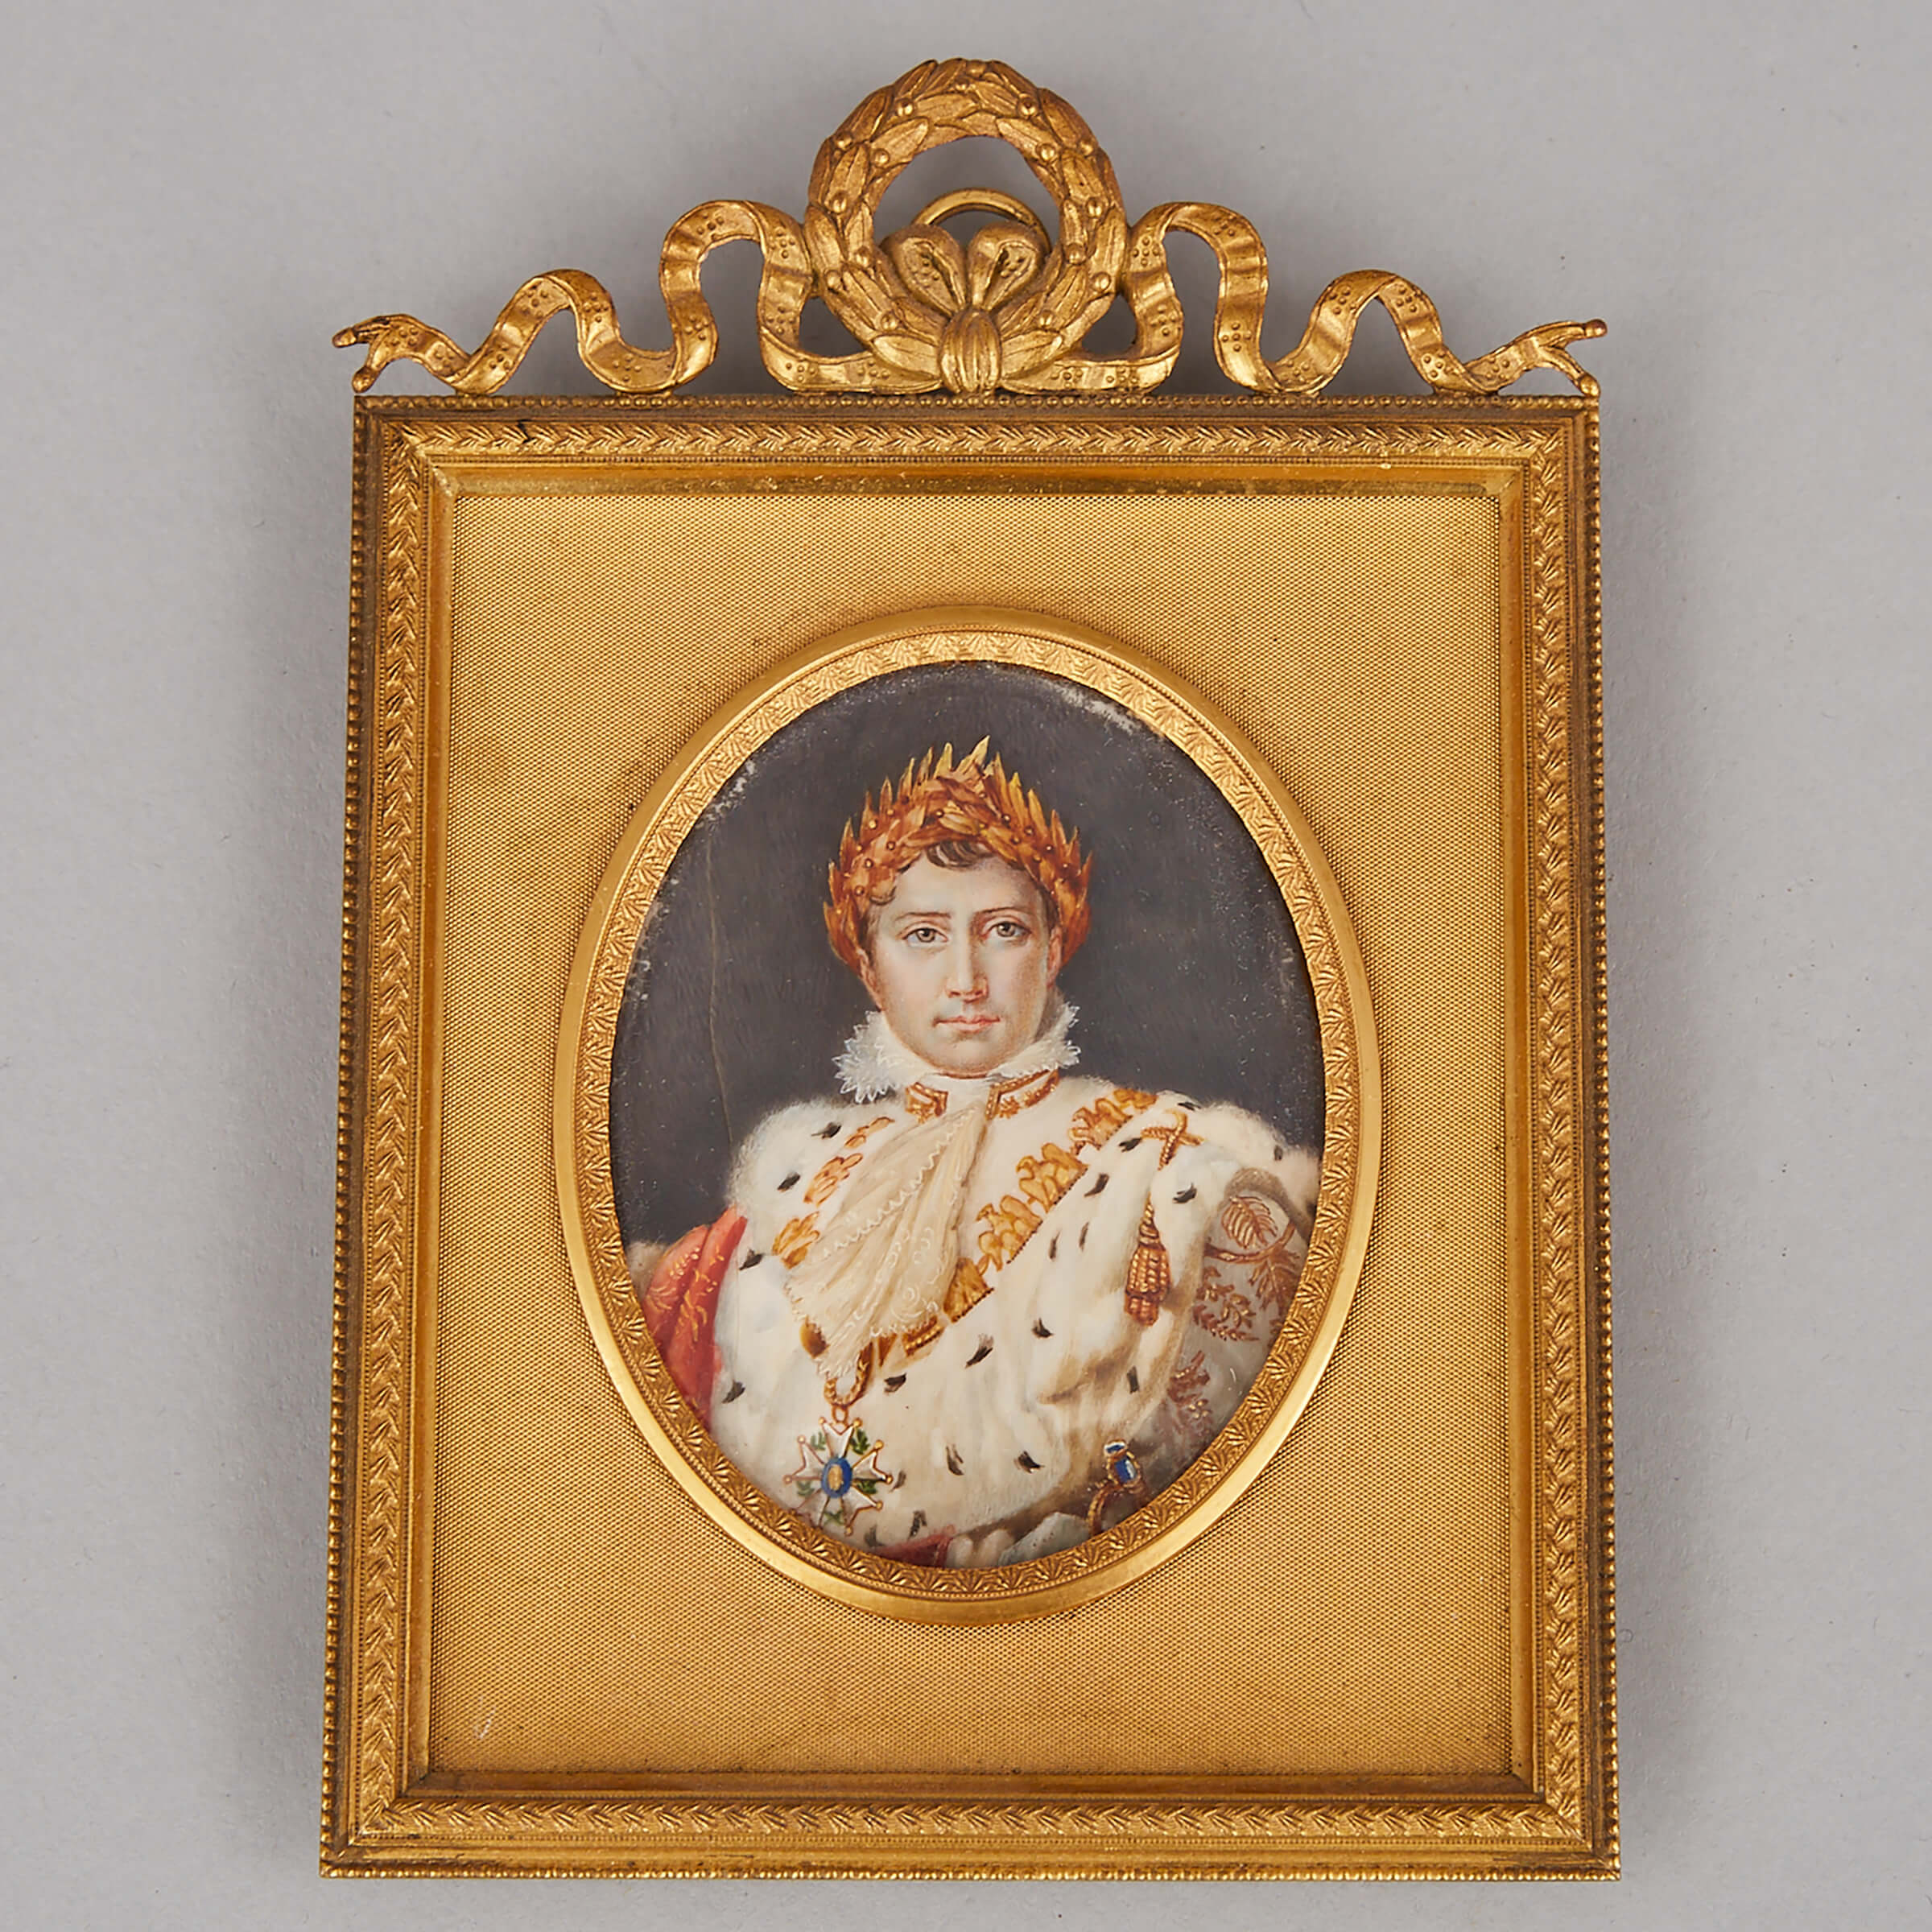 Portrait Miniature on Ivory of Napoleon I as Emperor of the French, late 19th century